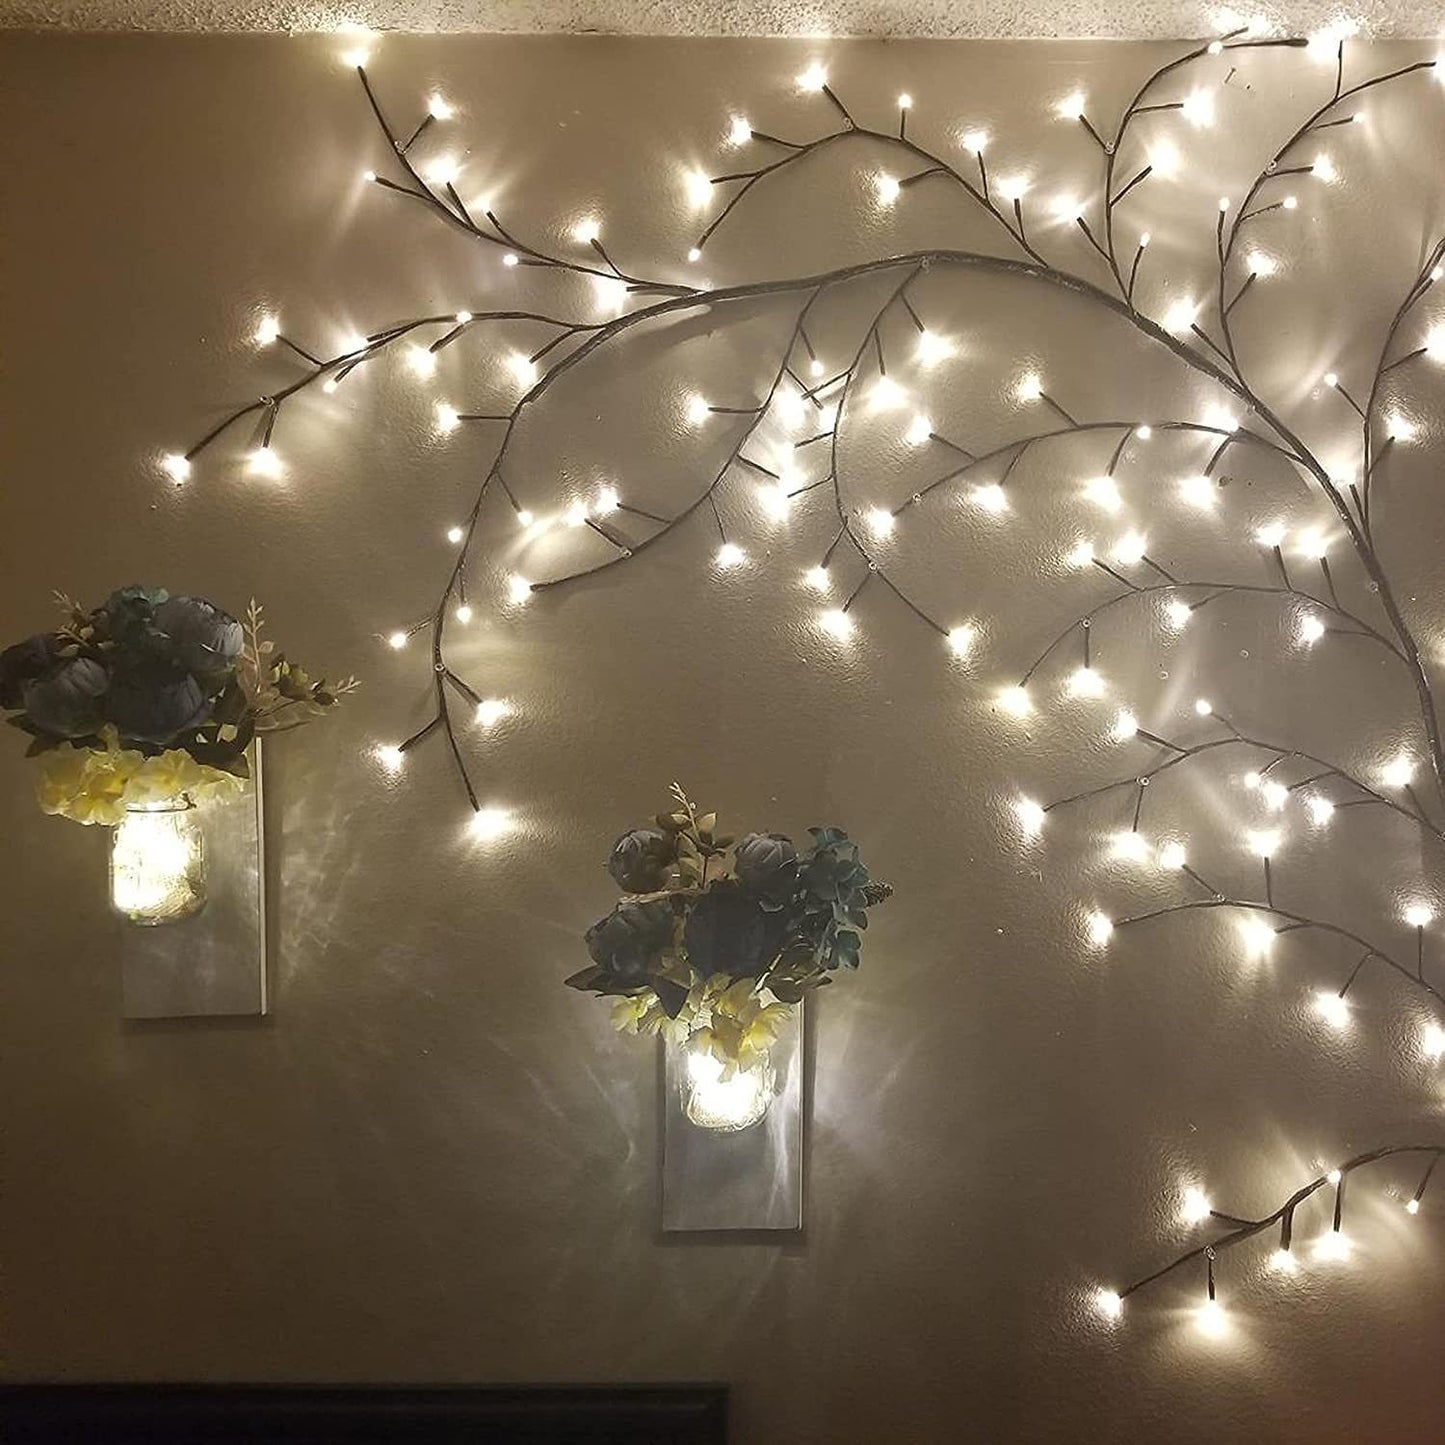 Enchanted LED Rattan Branch Lights - Perfect for Room Ambiance and Special Occasions